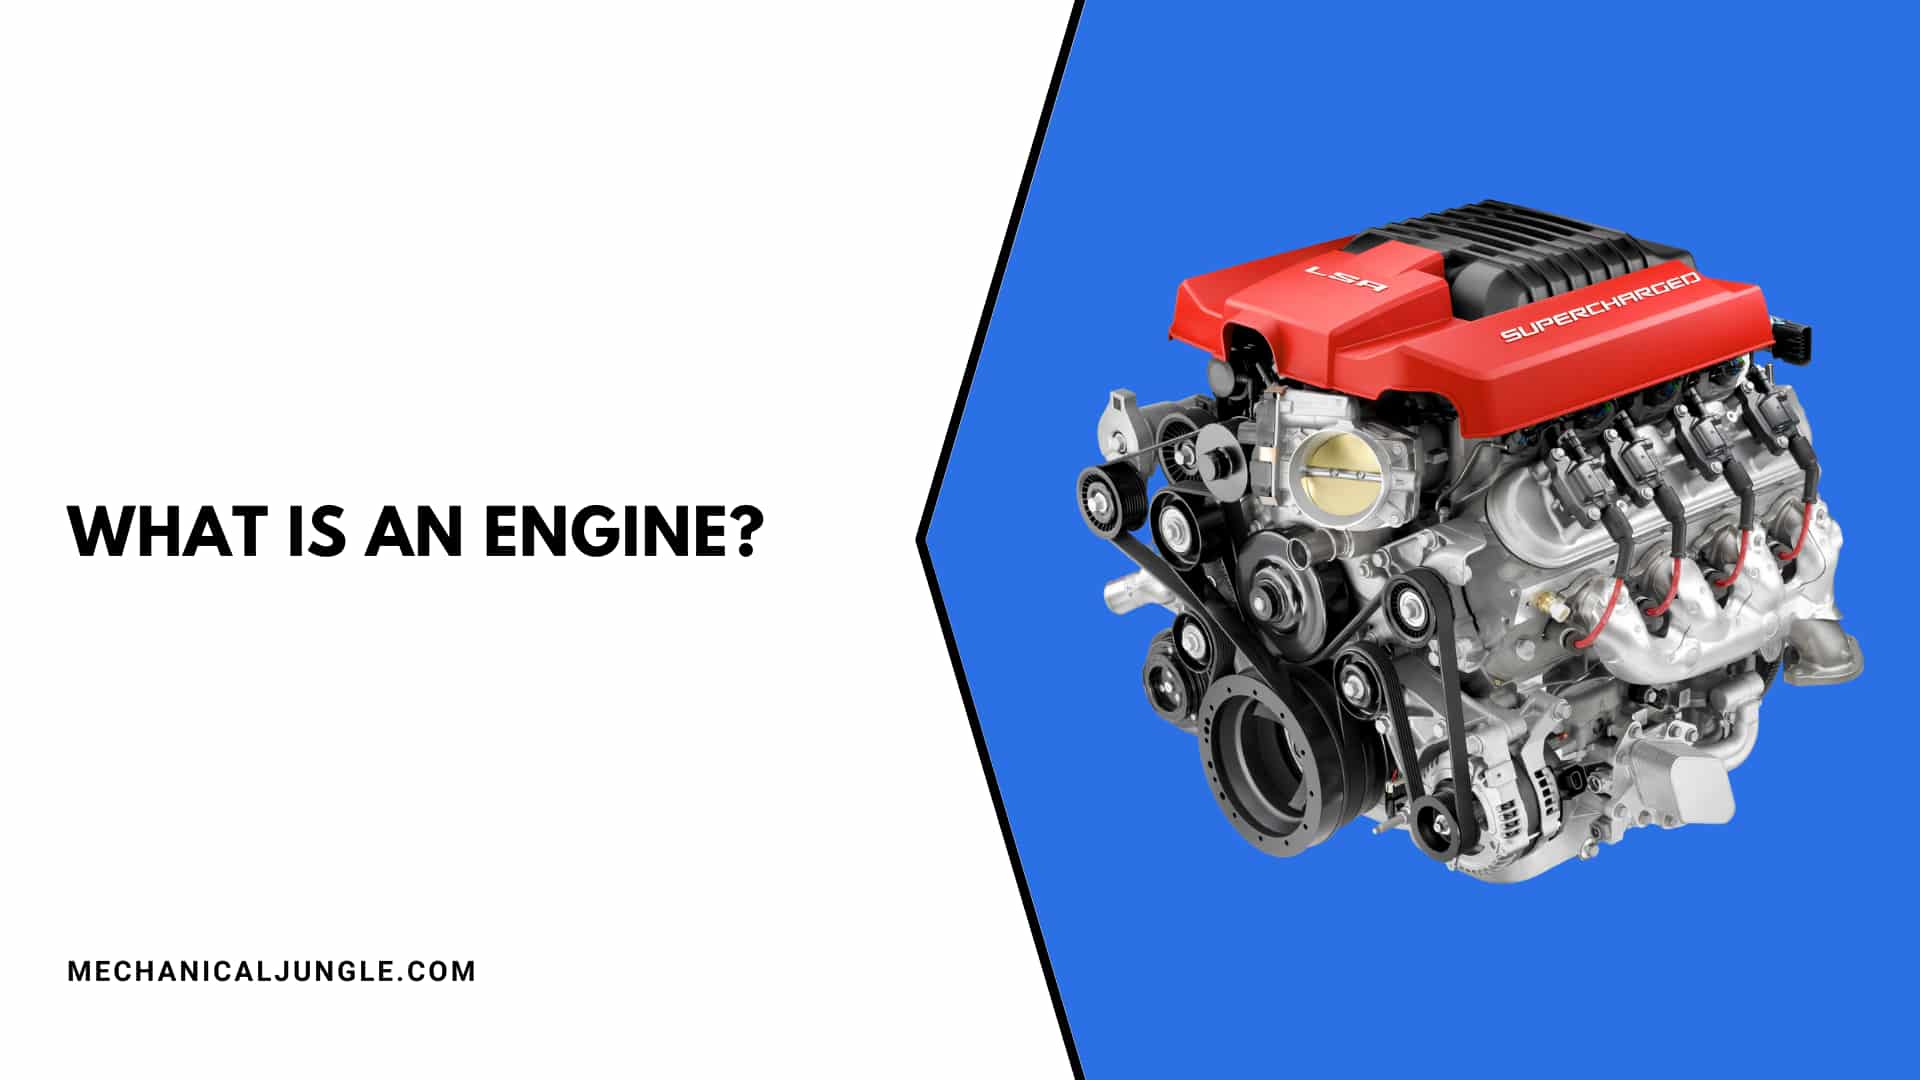 What Is an Engine?